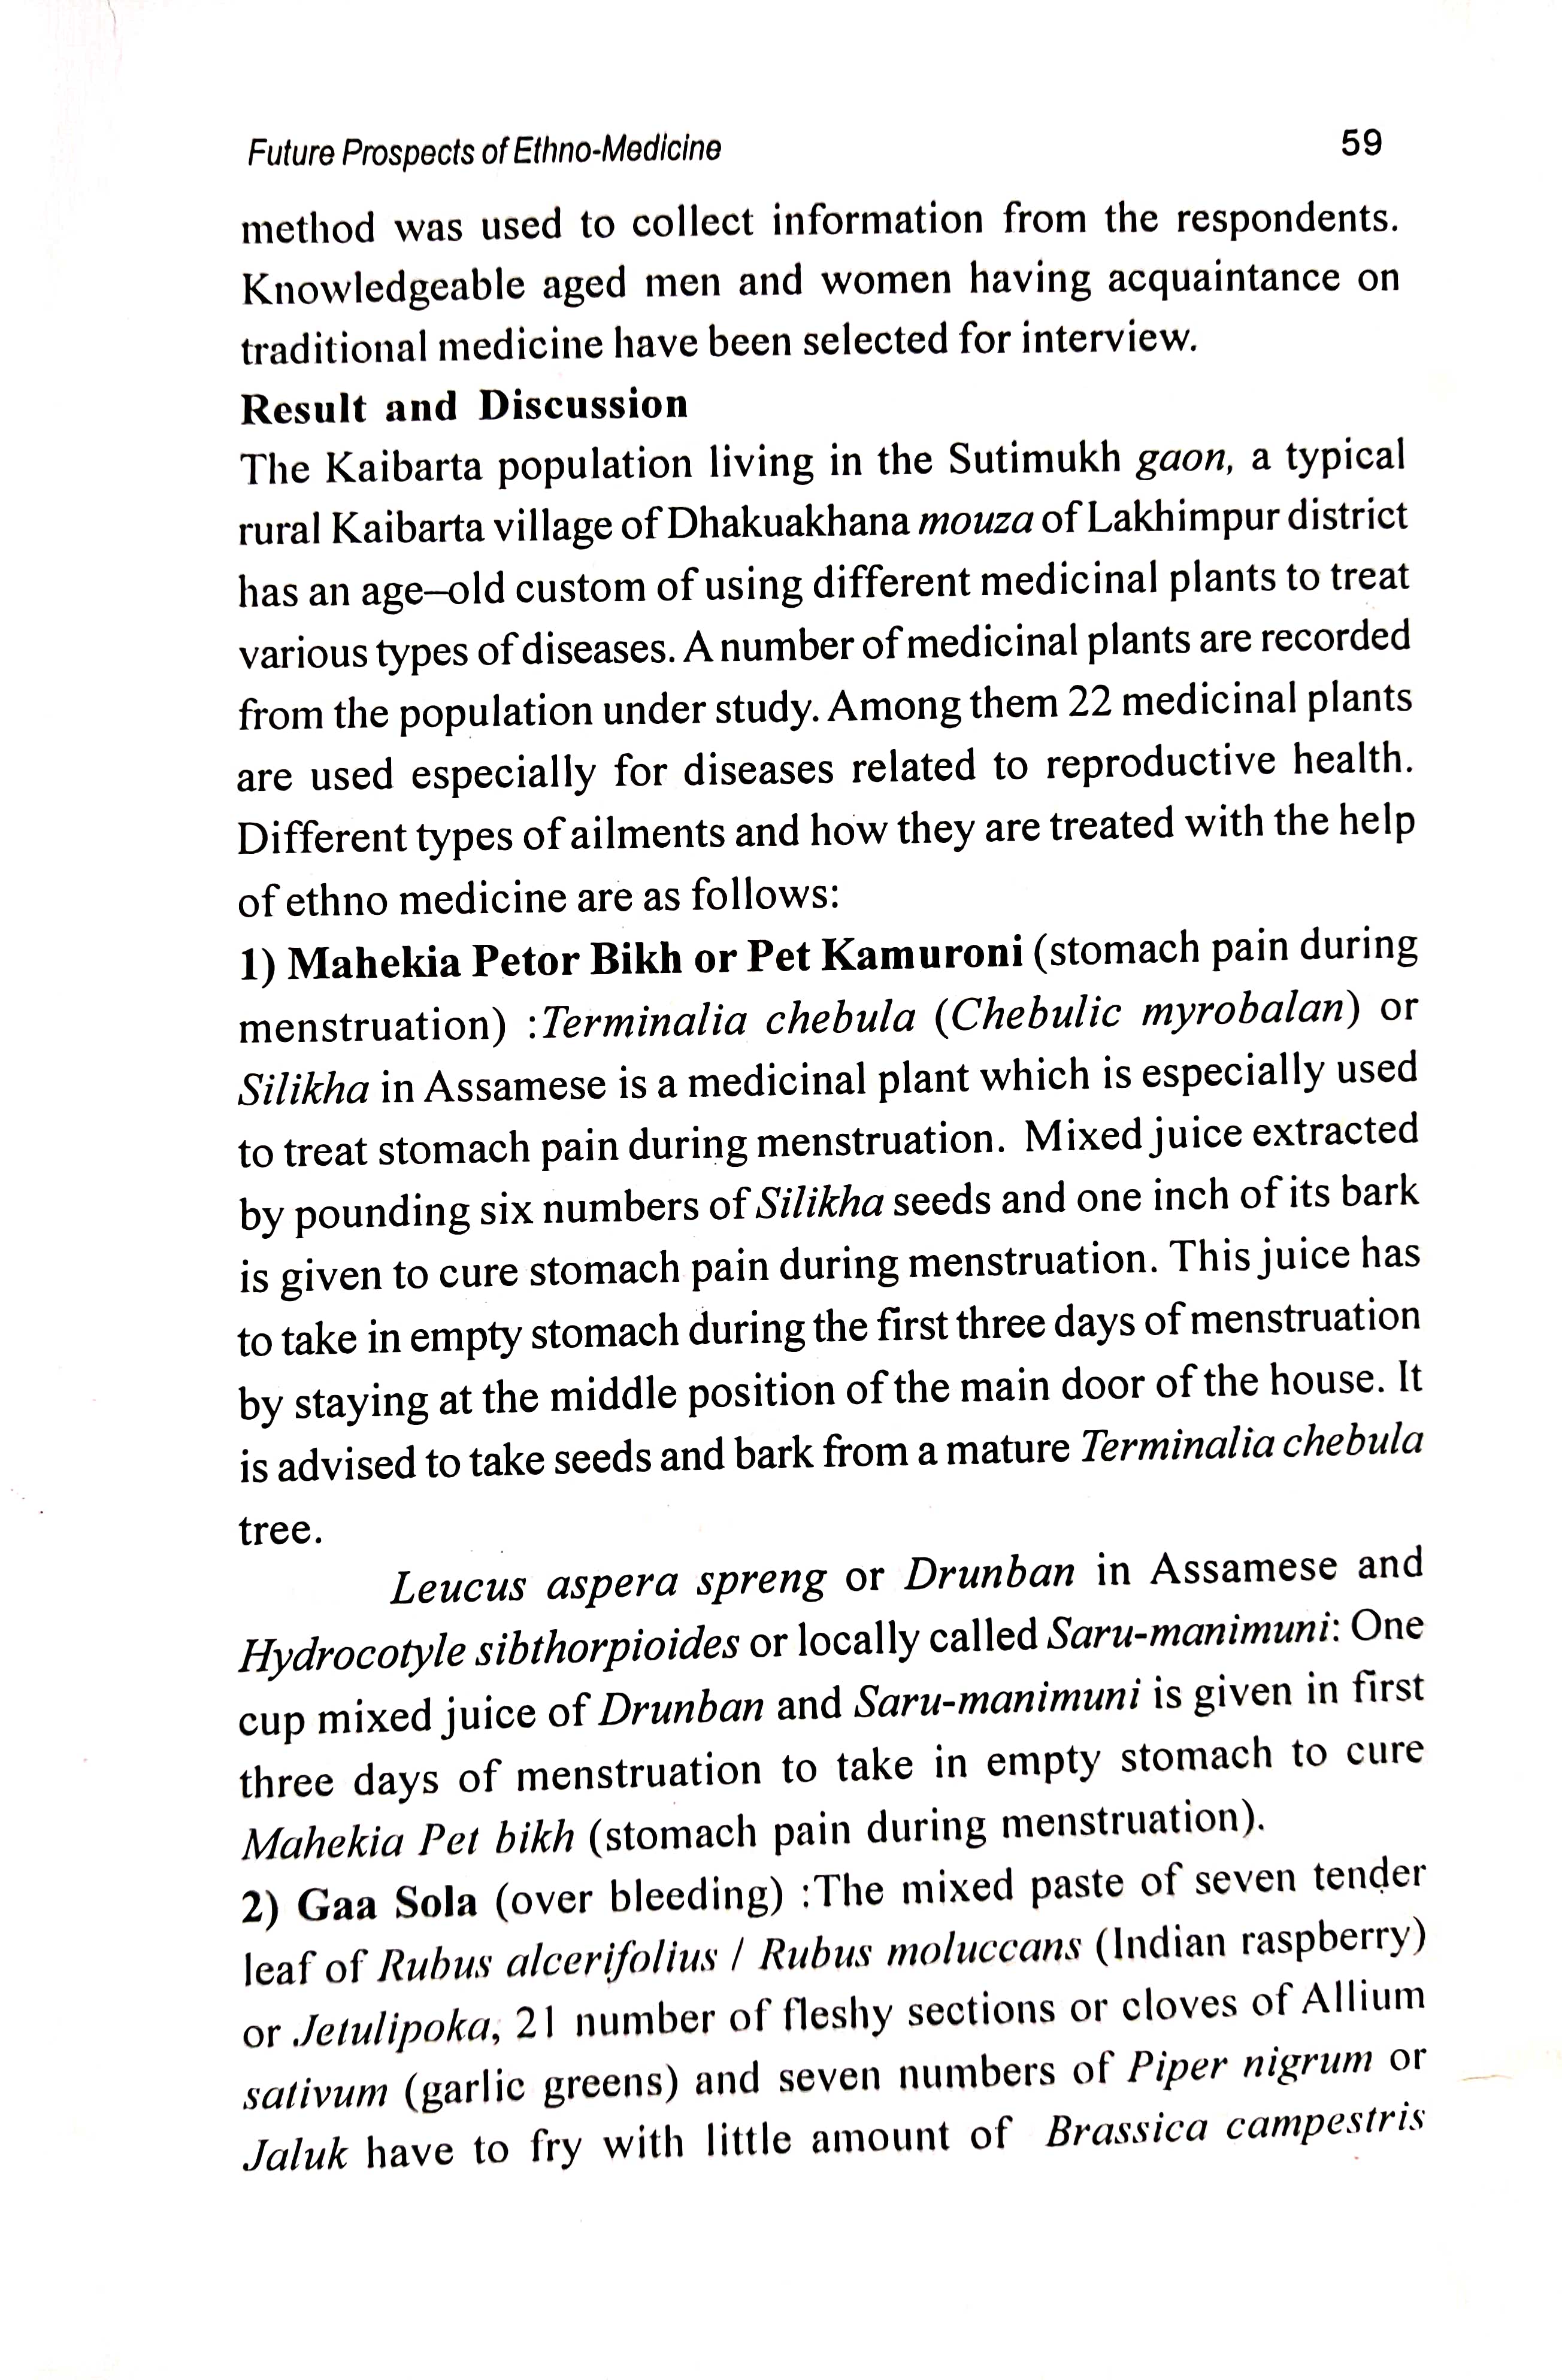 Ethno-Medicine-and-their-Practices-among-the-Kaibartas-of-Assam